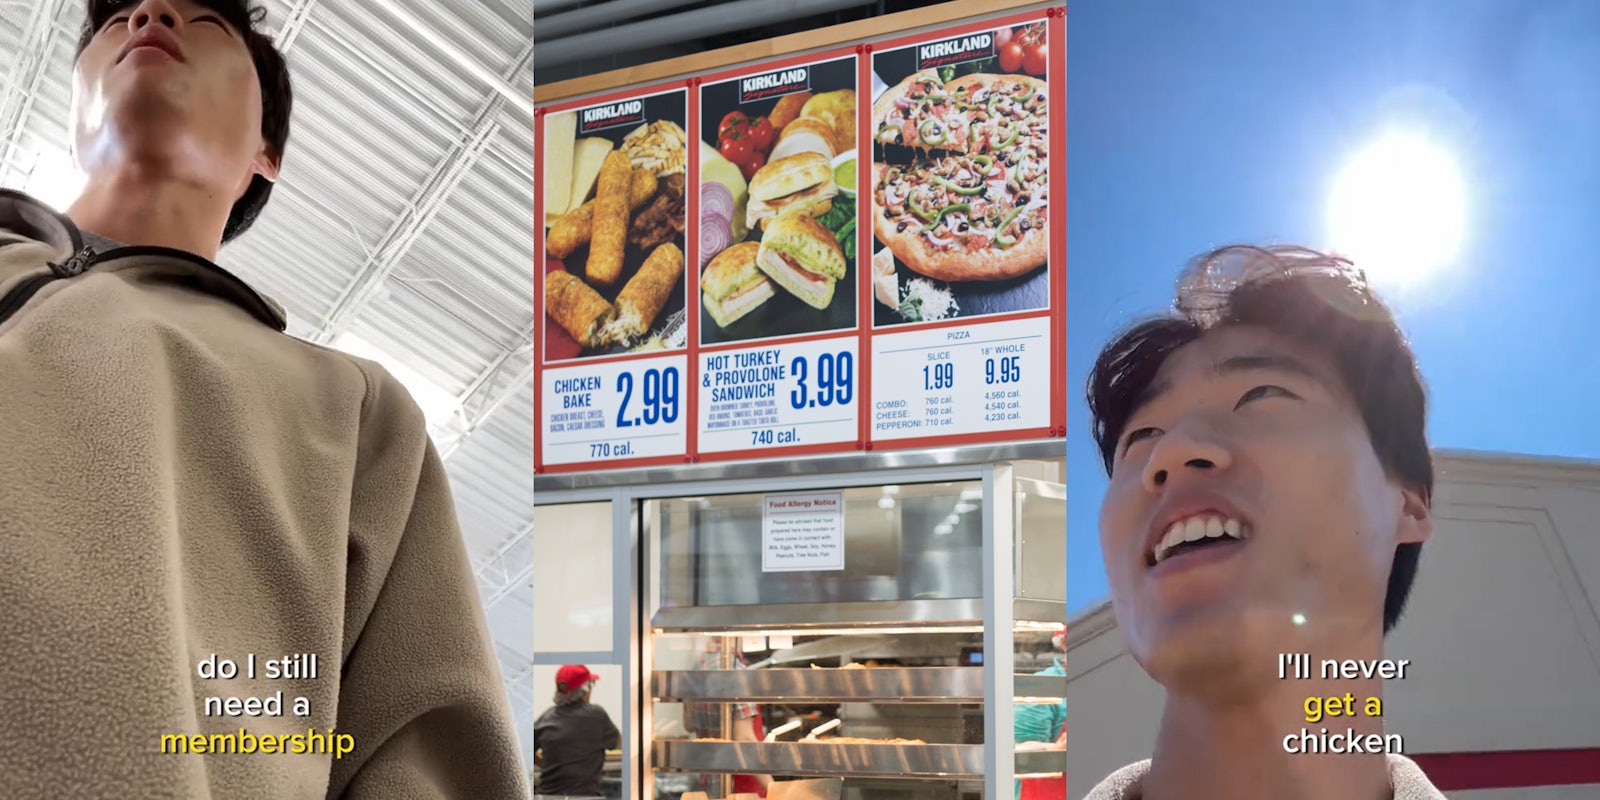 person speaking in Costco with caption 'do I still need a membership' (l) Costco food court with menu (c) person speaking outside Costco with caption 'I'll never get a chicken' (r)